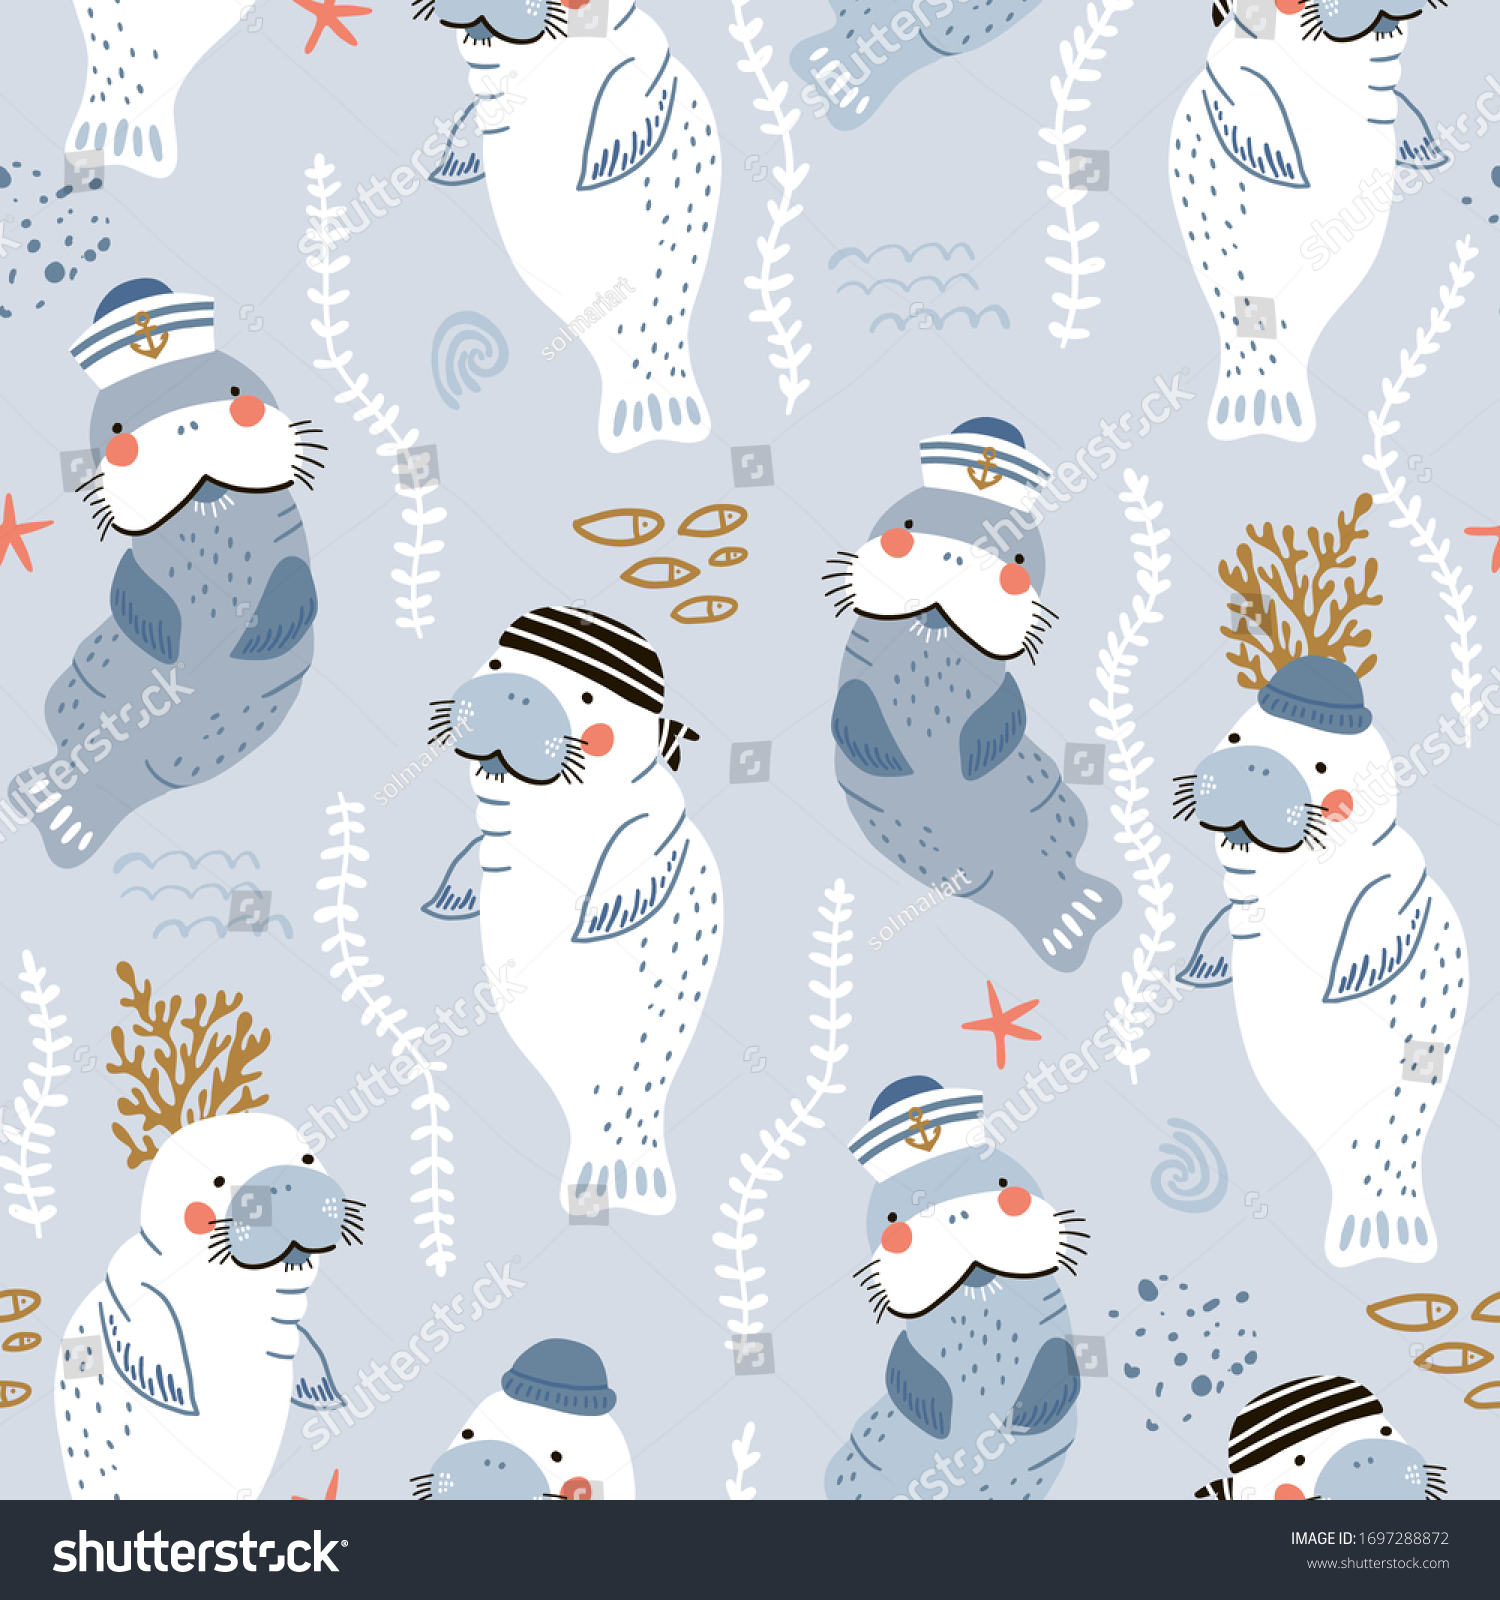 SVG of Seamless childish pattern with cute manatees sailor caps and bandanas. Creative scandinavian style under see kids texture for fabric, wrapping, textile, wallpaper, apparel. Vector illustration svg